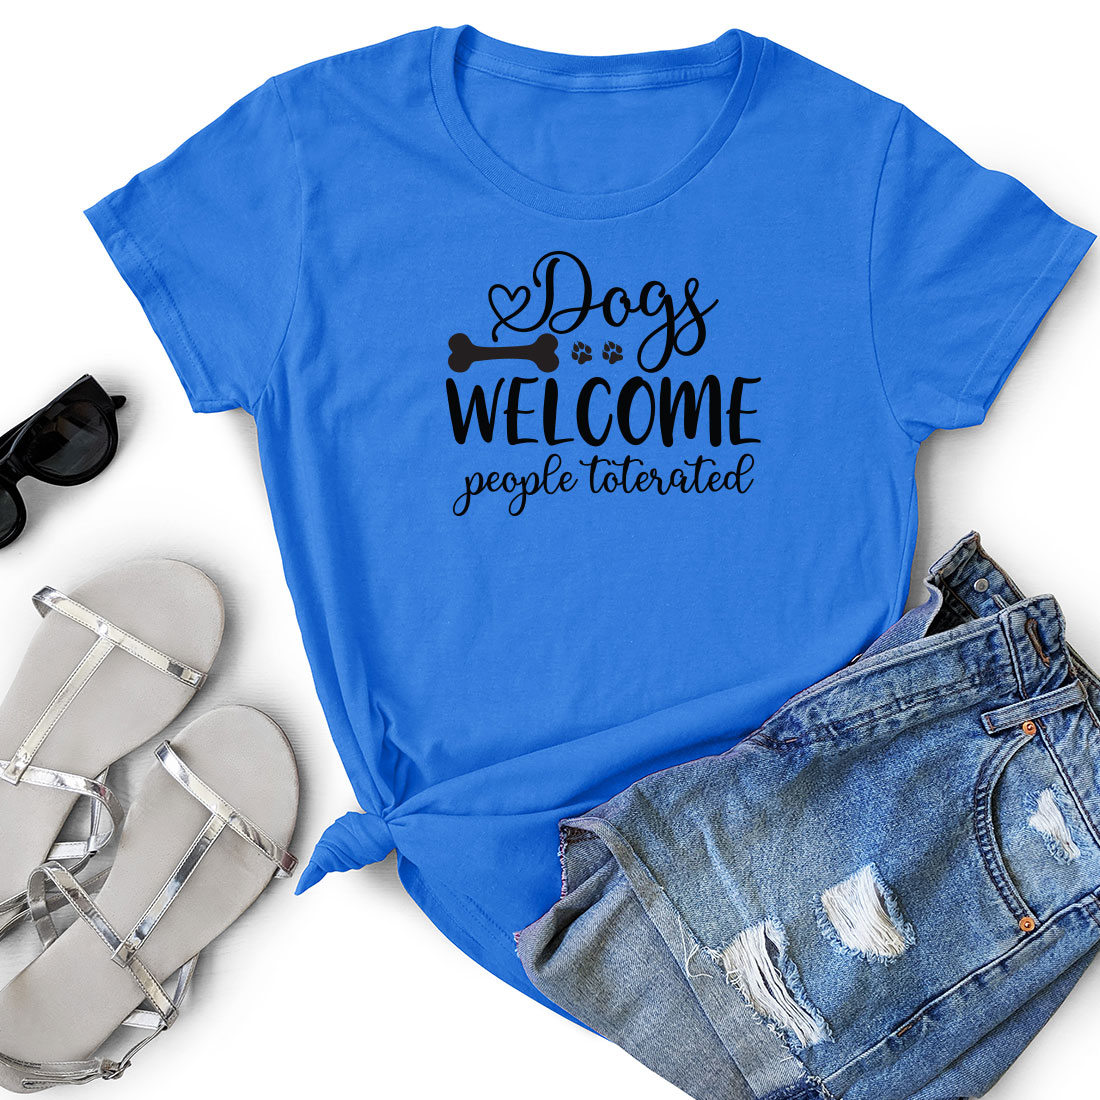 T - shirt that says dogs welcome people to travel.